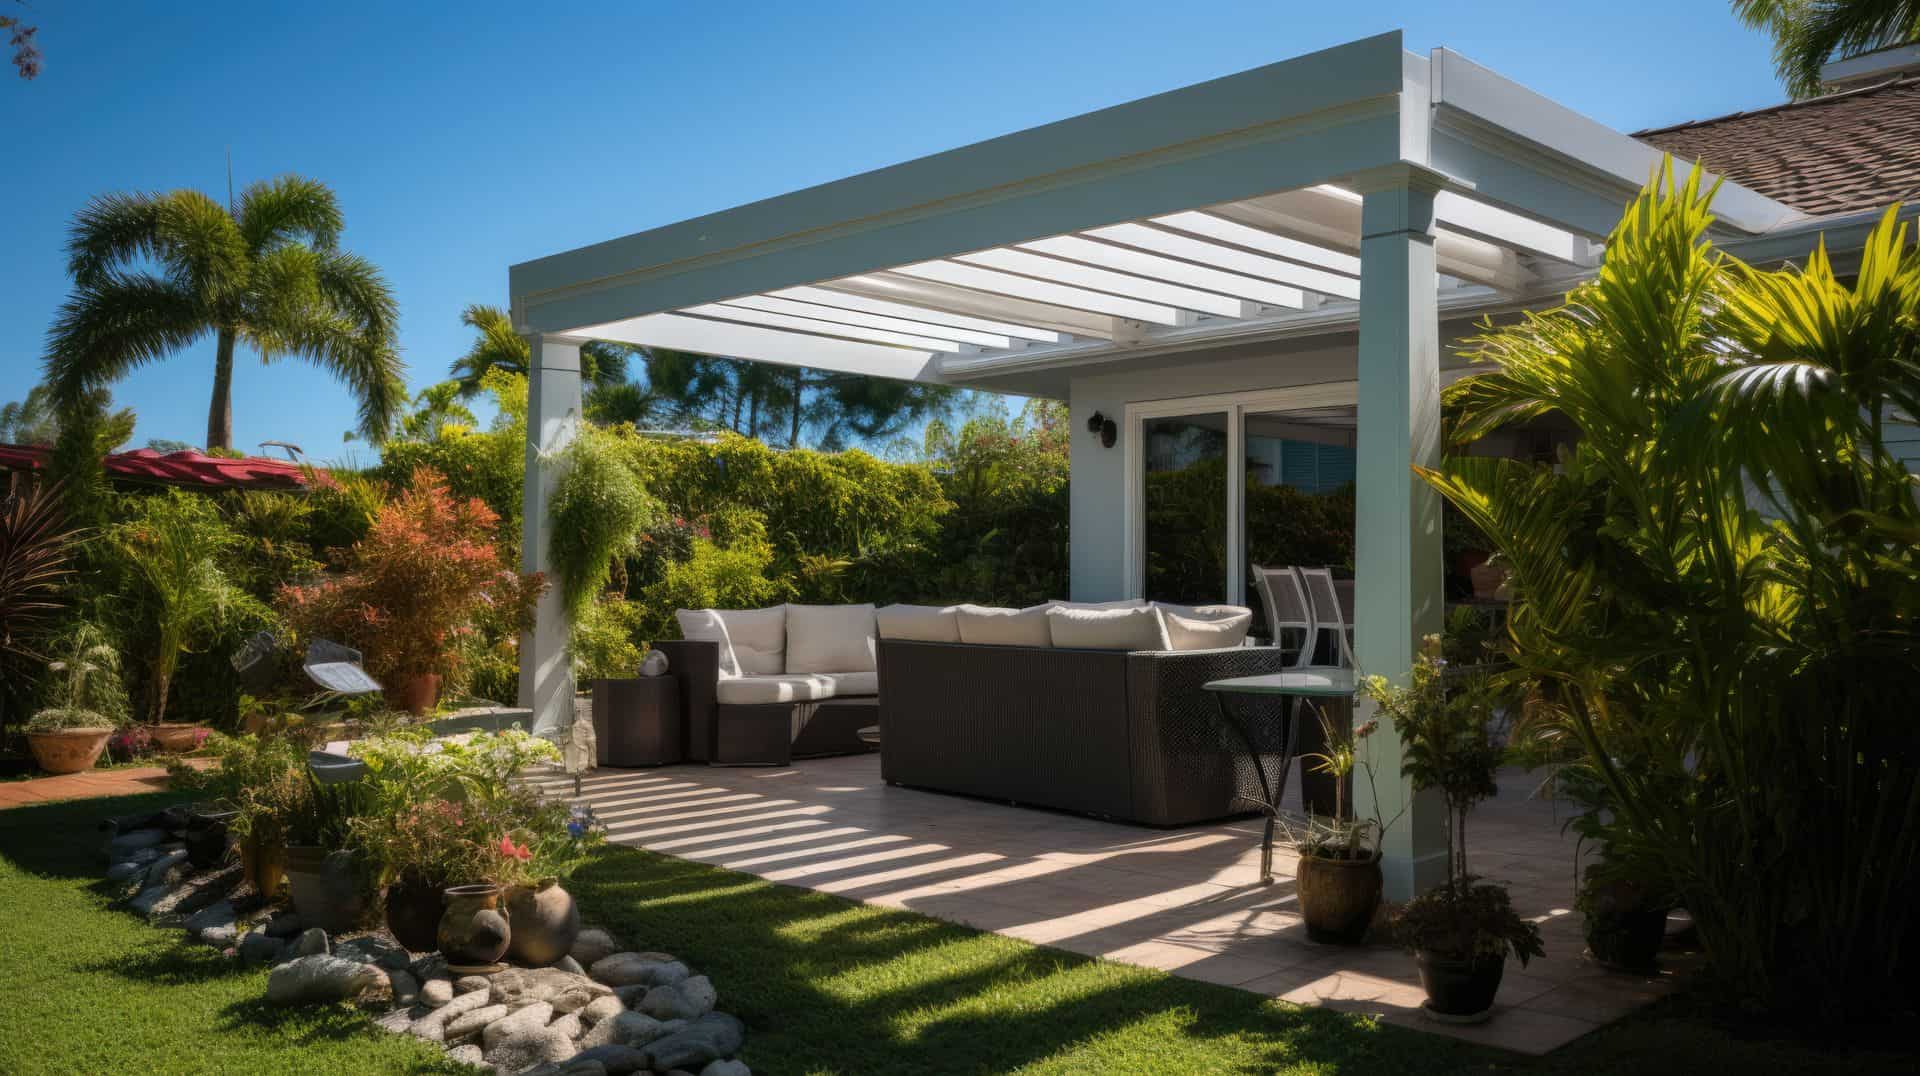 Outdoor oasis: Vinyl patio cover, concrete platform, lush potted plants, grassy lawn, perfect relaxing spot.